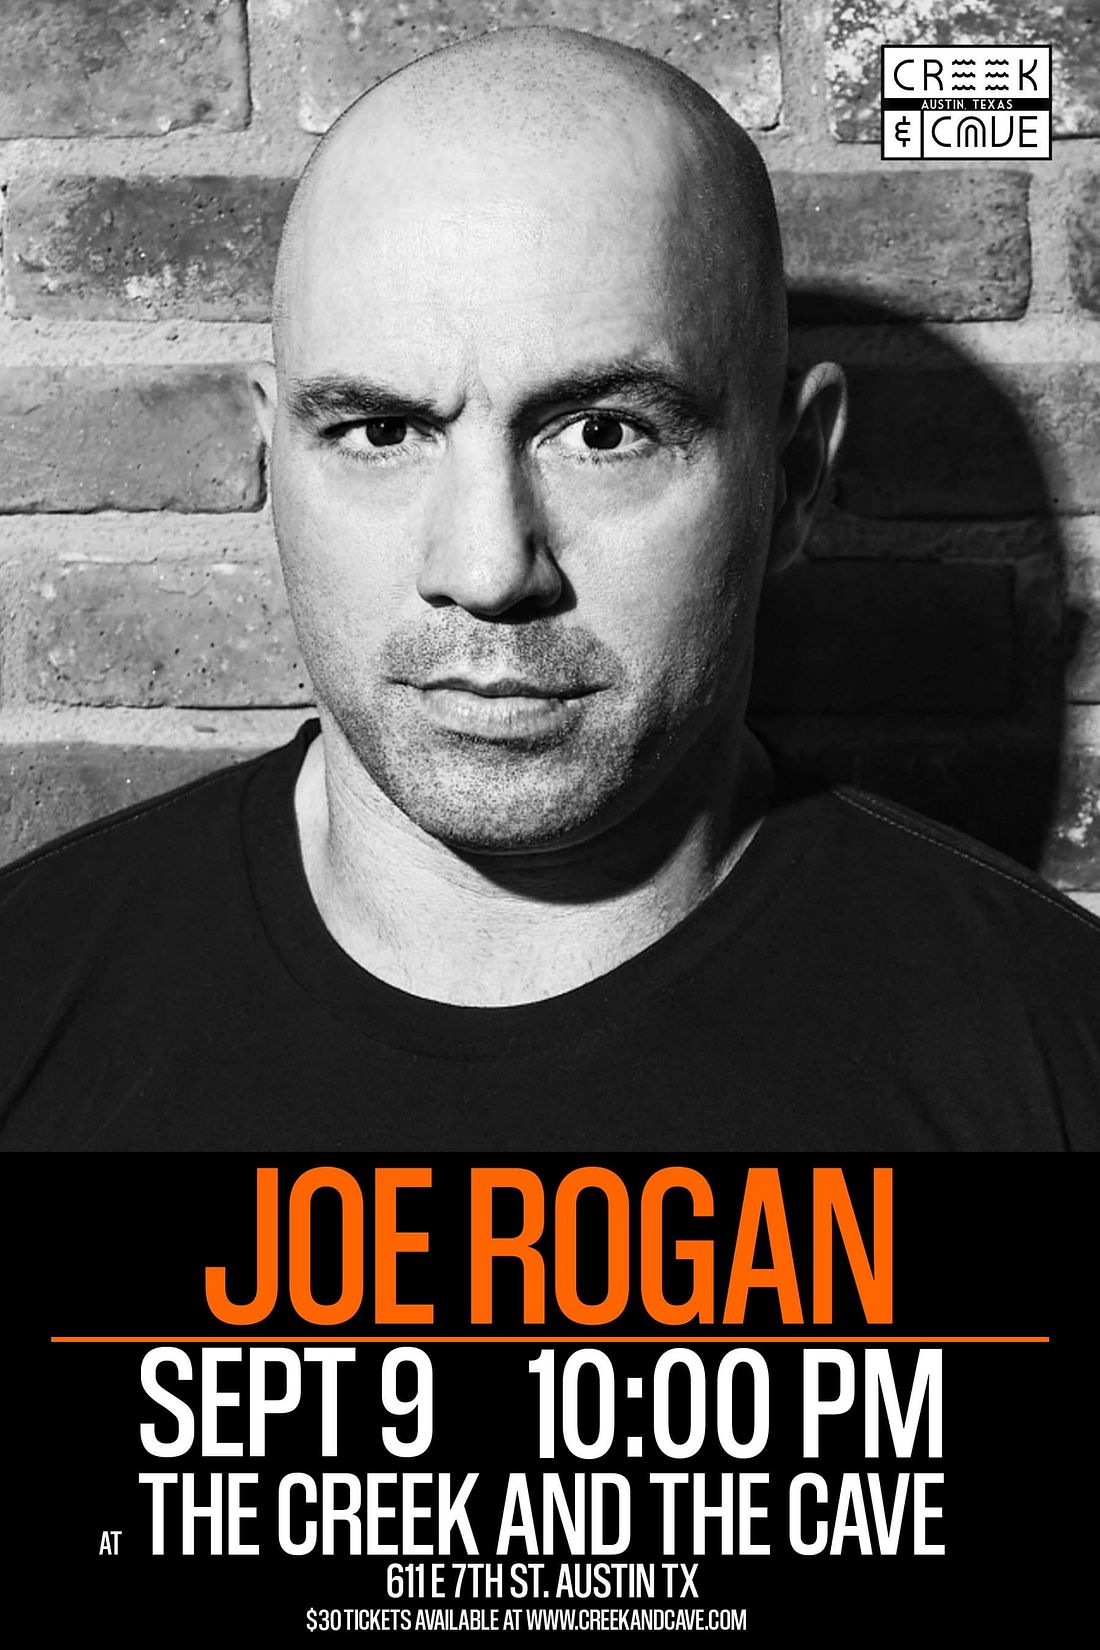 Joe Rogan Tickets at The Creek and The Cave in Austin by The Creek and